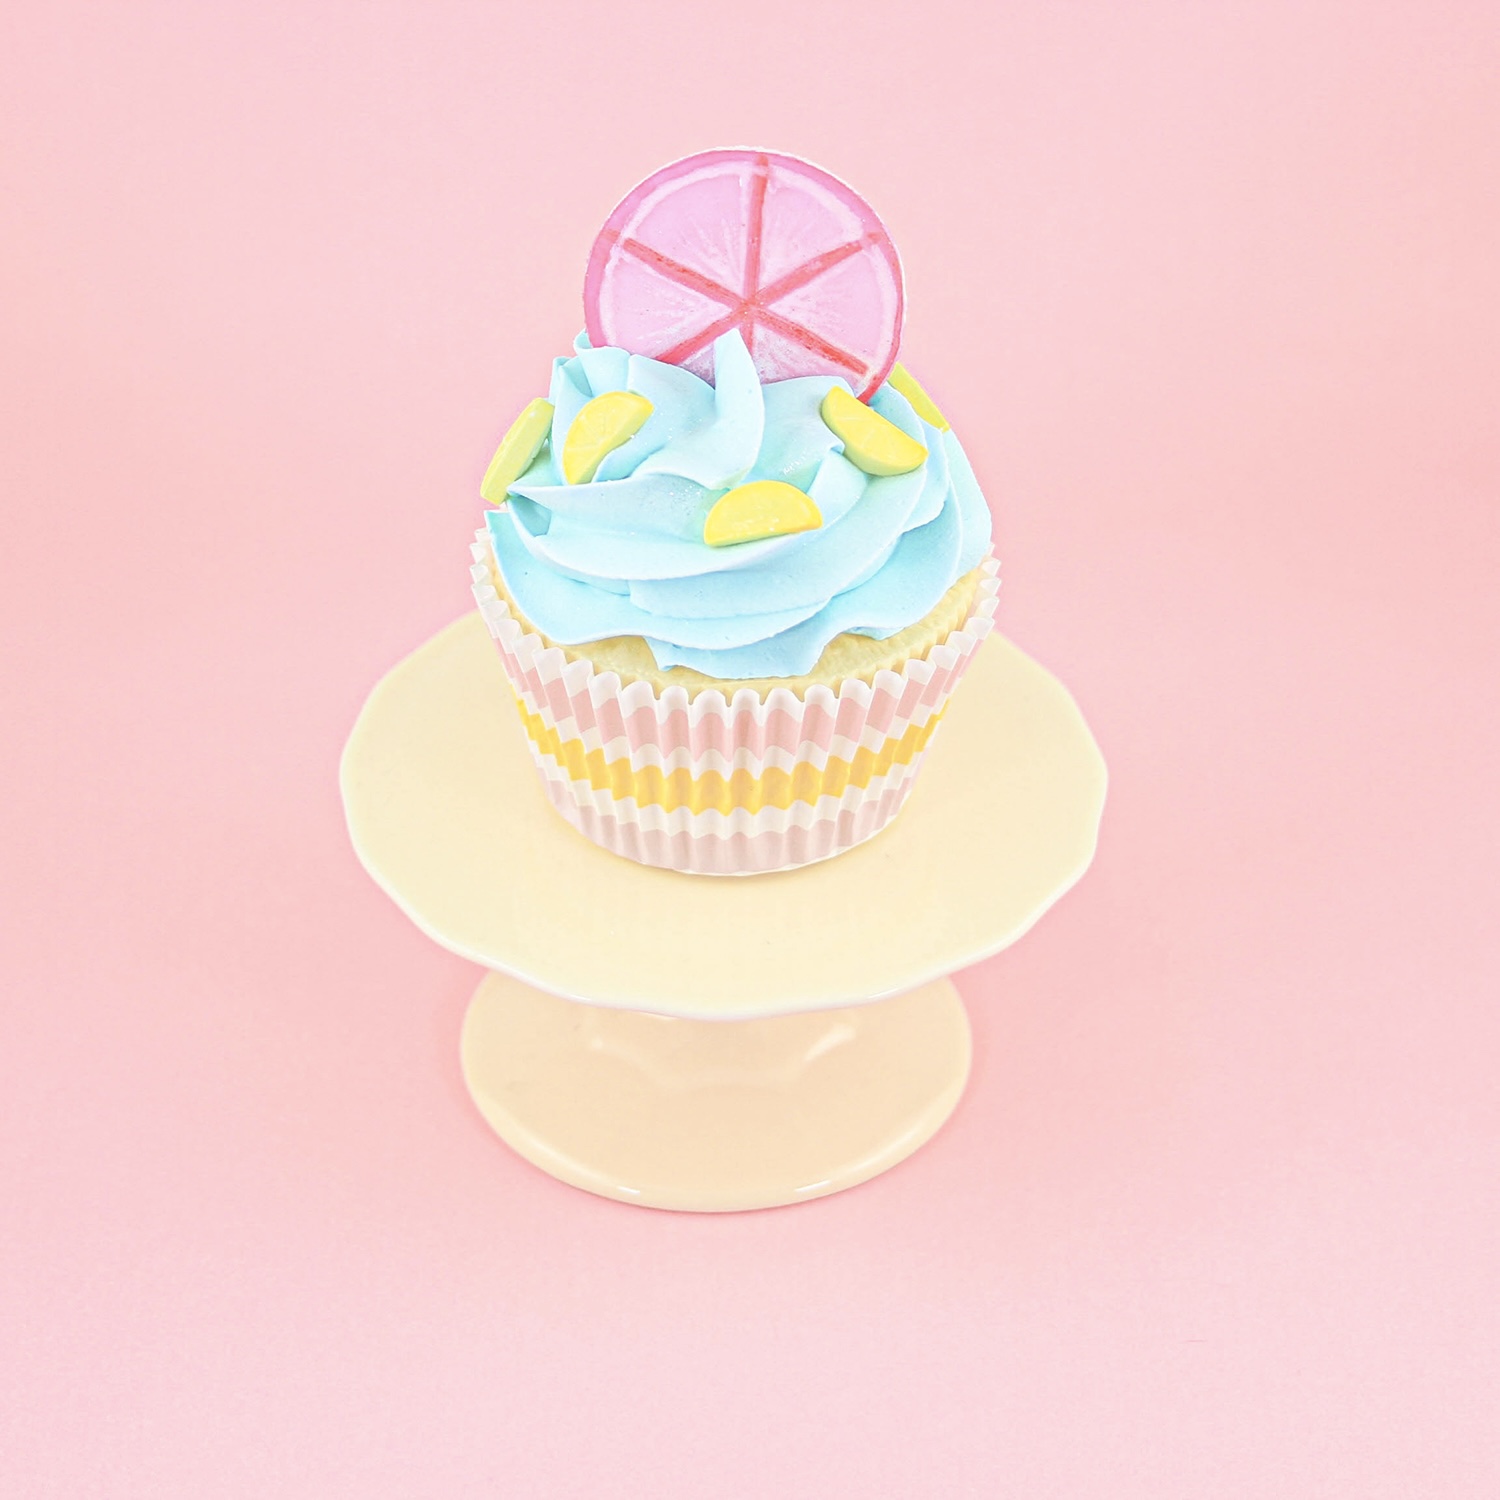 Blue swirl cupcake with a hand painted pink lemon slice fondant topper and lemon sprinkles.